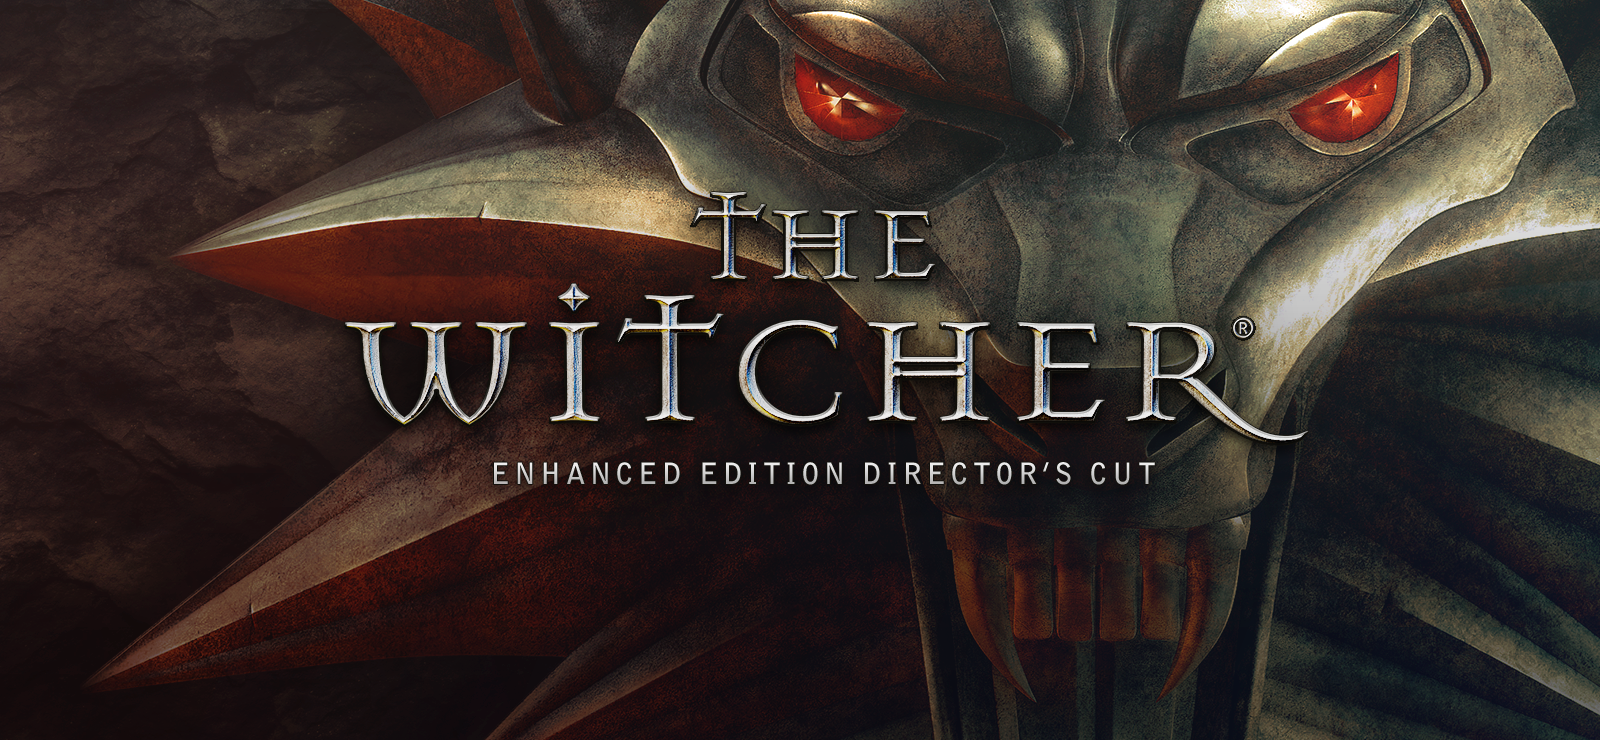 BESTSELLER - The Witcher: Enhanced Edition